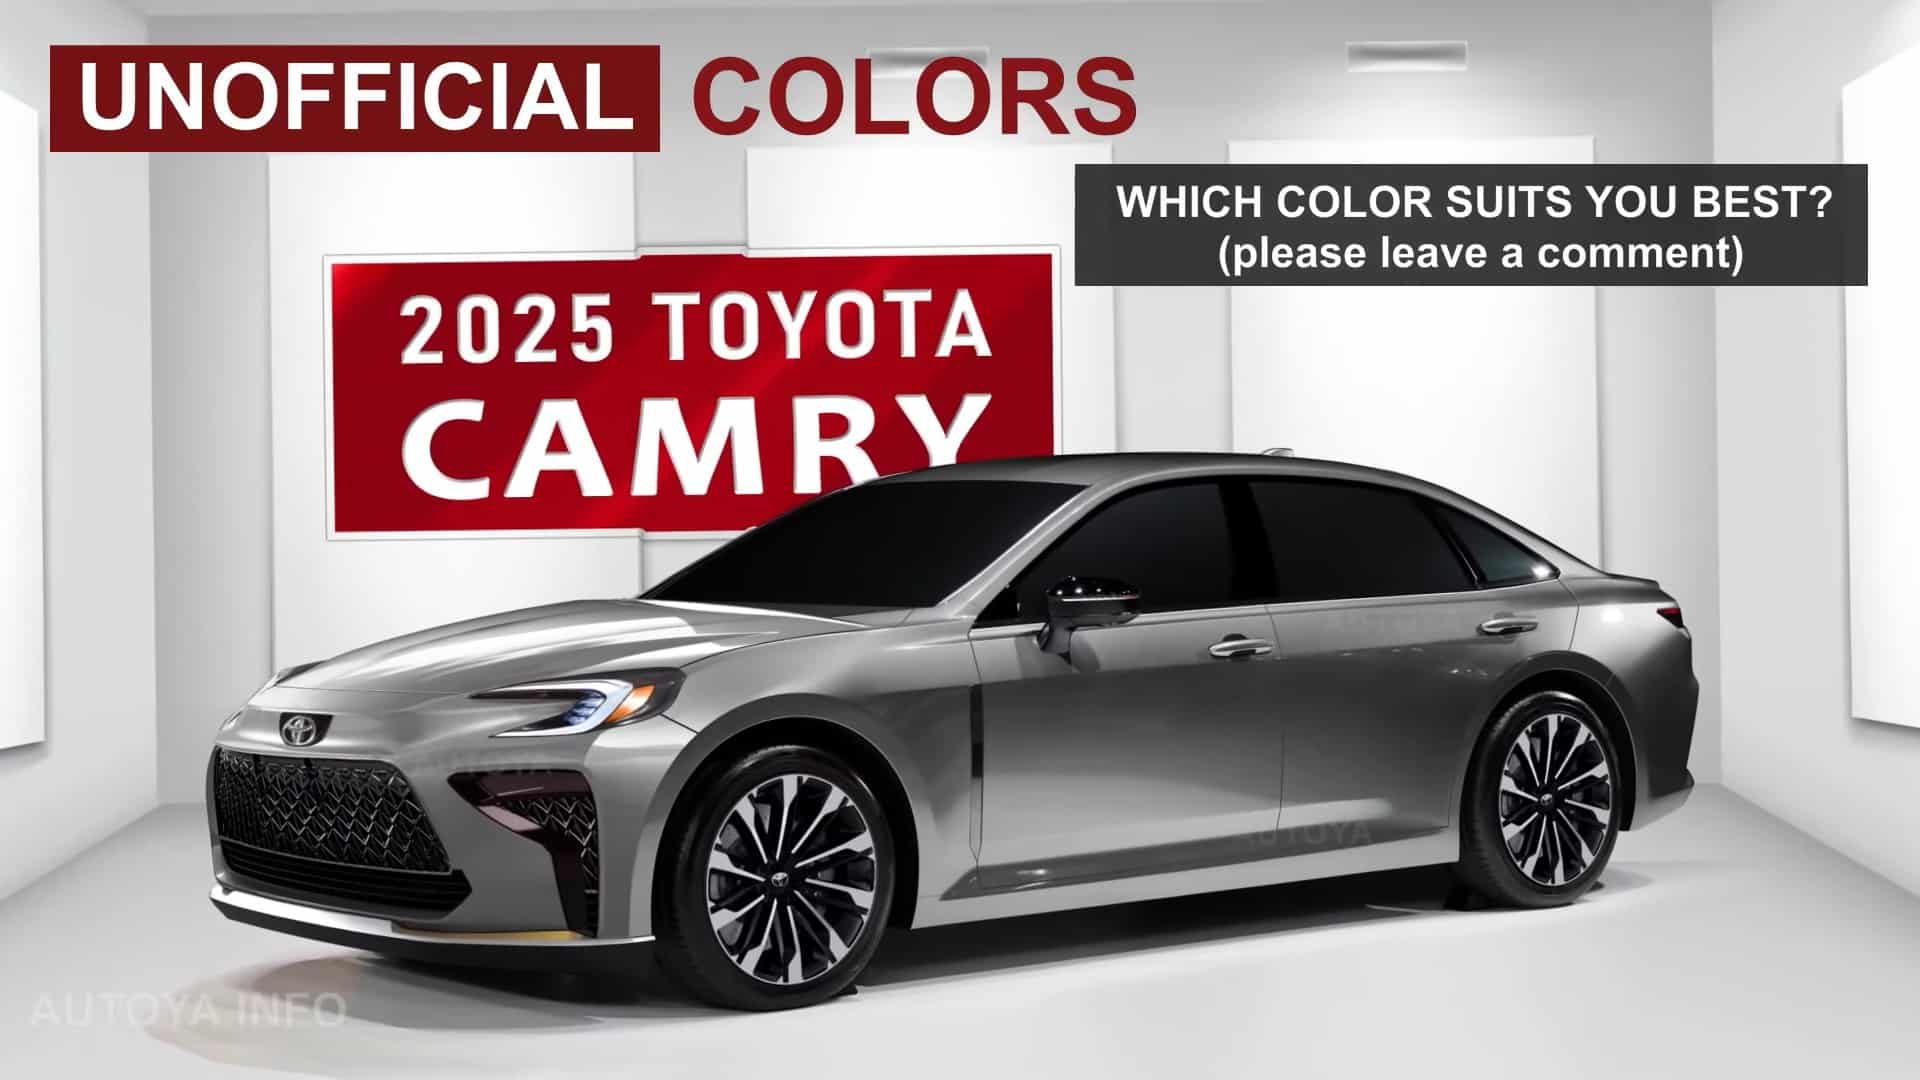 all new 2025 toyota camry xv80 features a simple yet tasty imaginary redesign 11